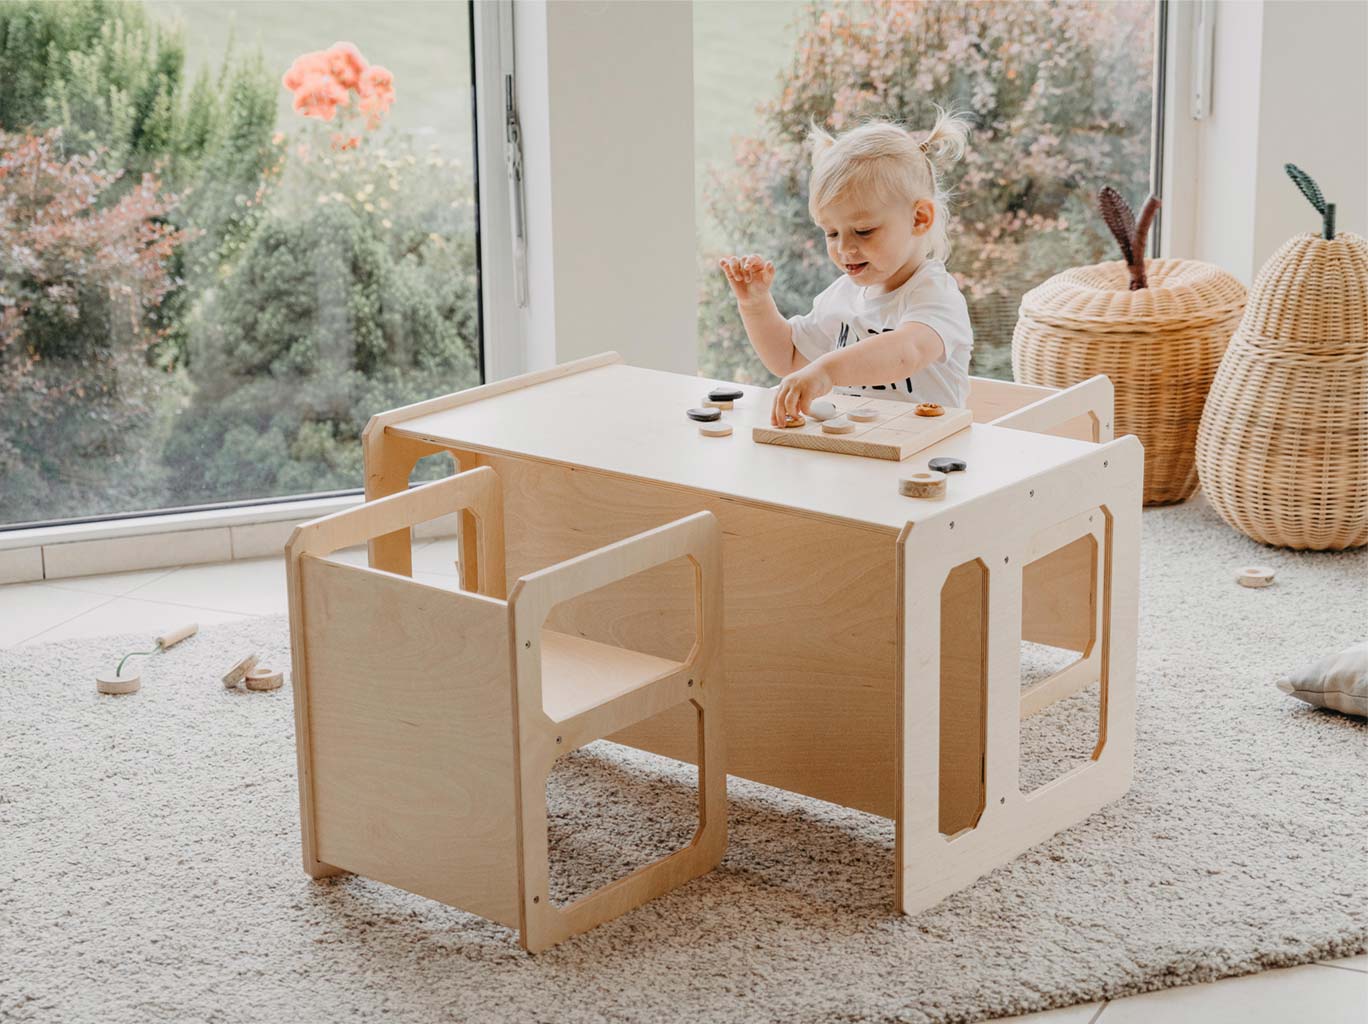 A child playing with a wooden table and chairs.